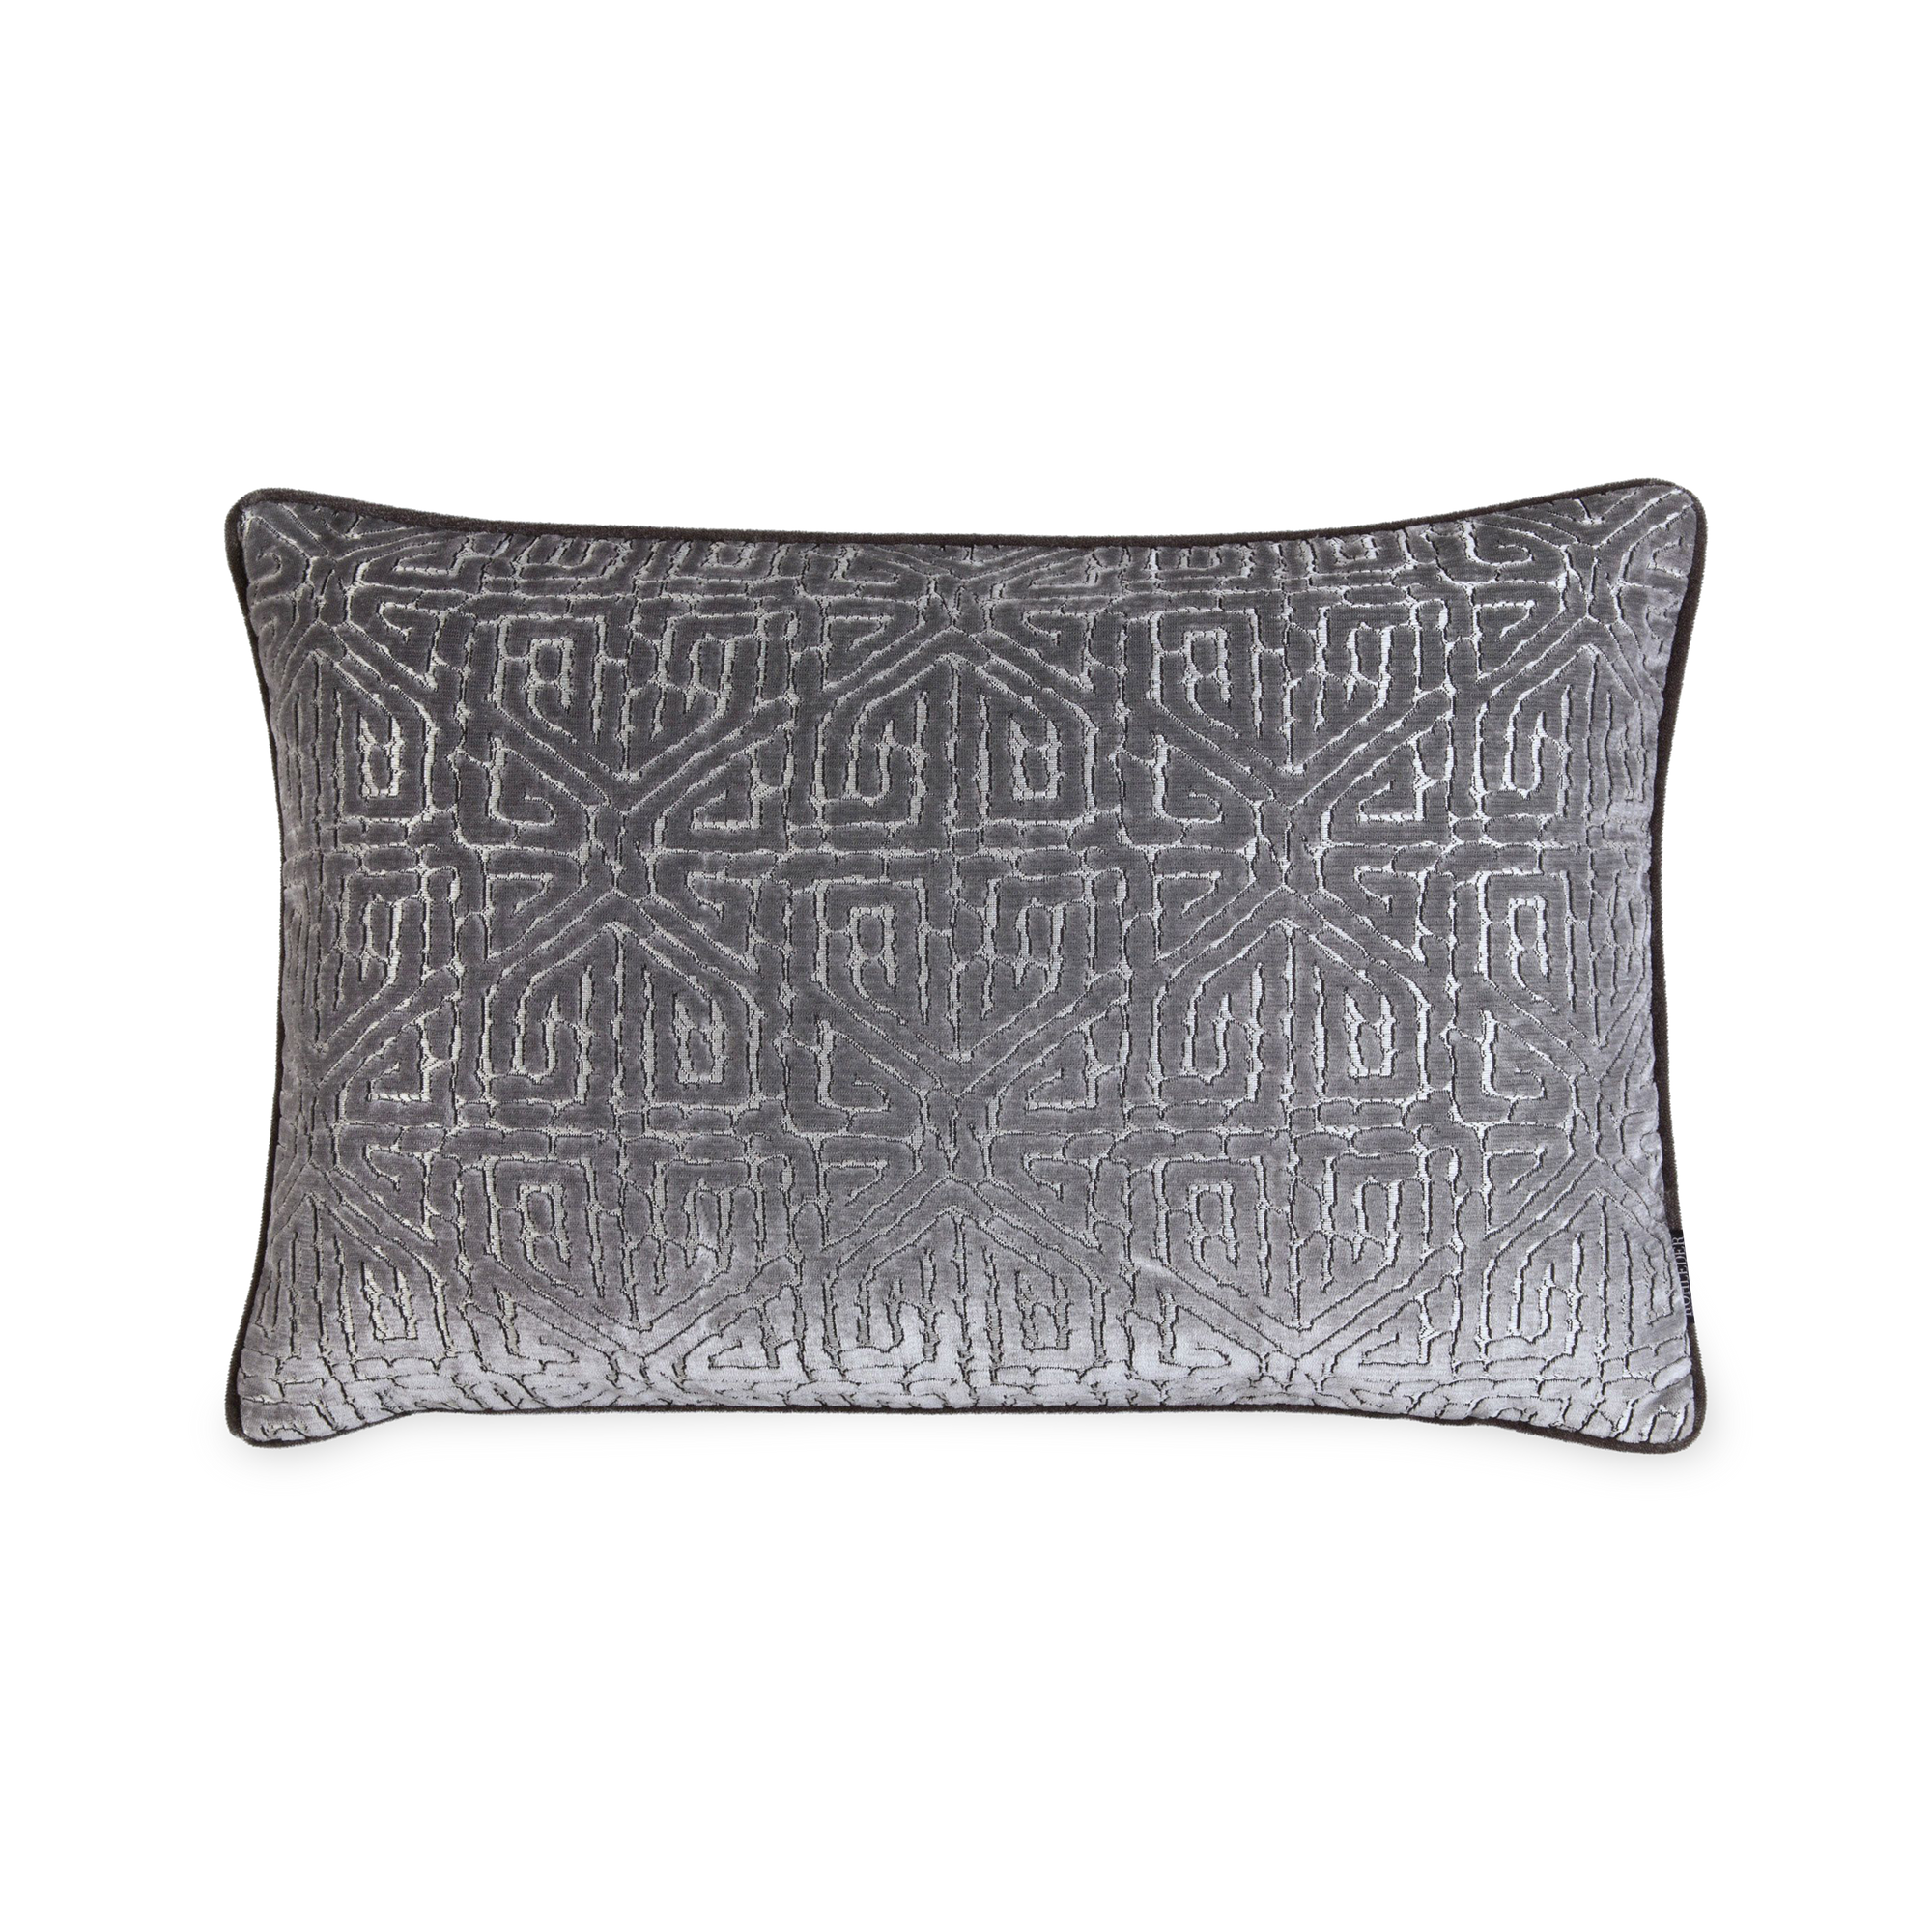 The Maze Pillow features an Aztec labyrinth pattern on the finest viscose velour.